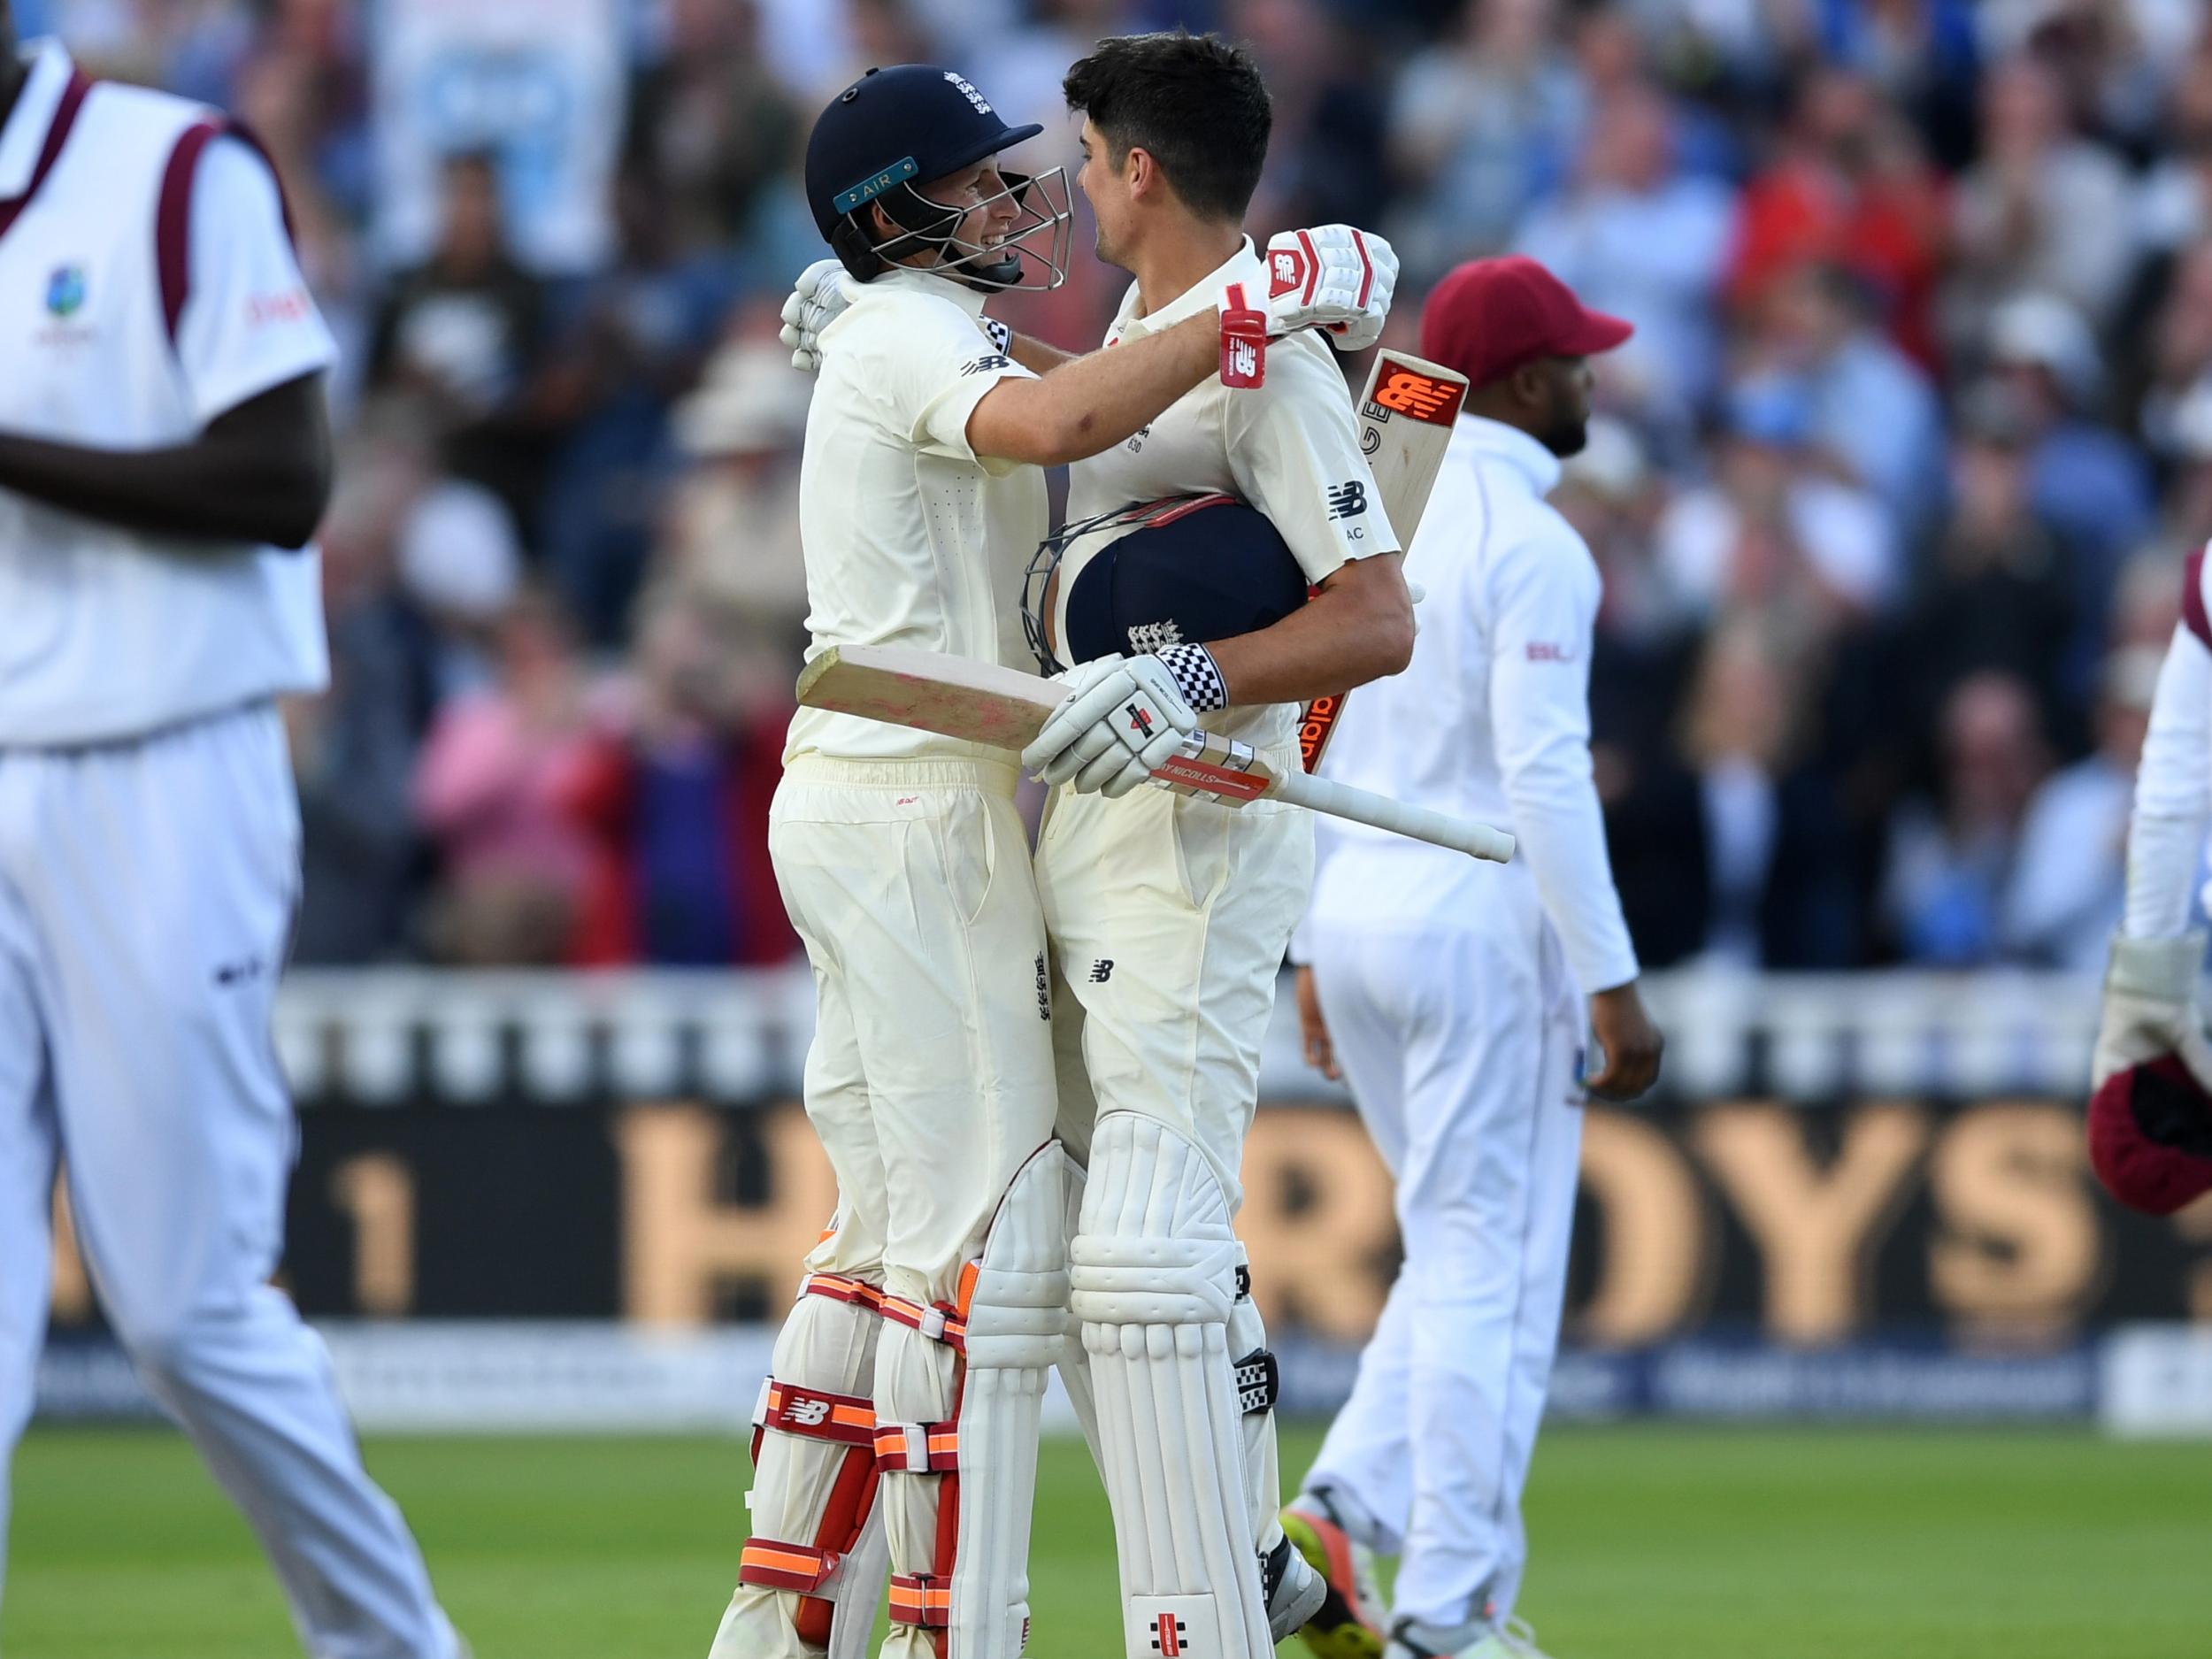 Root and Cook dominated against a weak bowling line-up